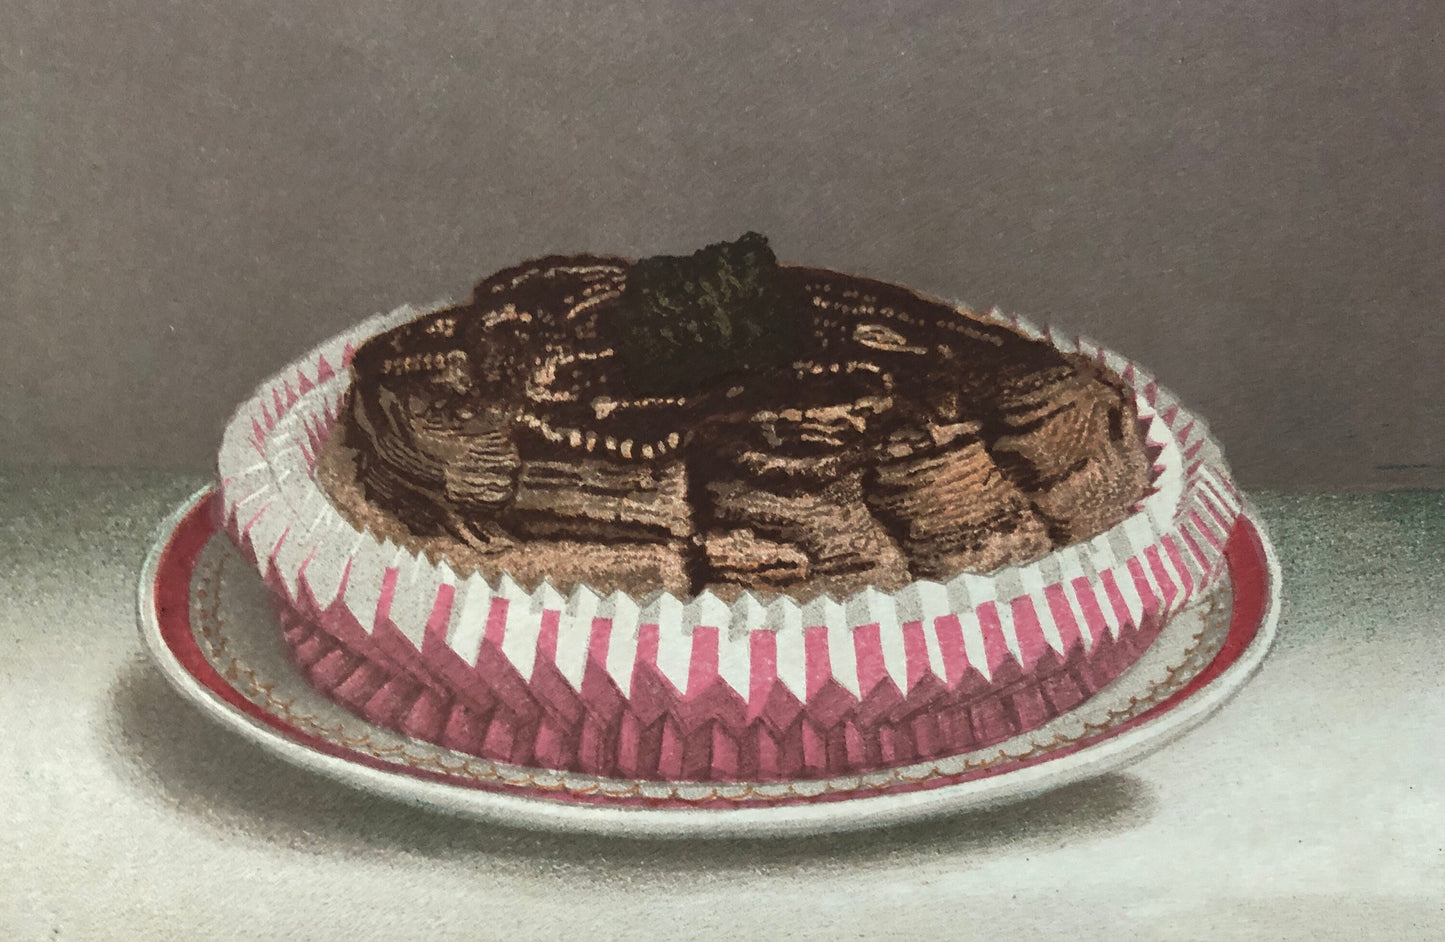 Three Plates of food From a Victorian Cookbook. Original chromolithographs. Engaved by Thomas Kell in the 1880’s. Size: 17.5 x 25 cms.